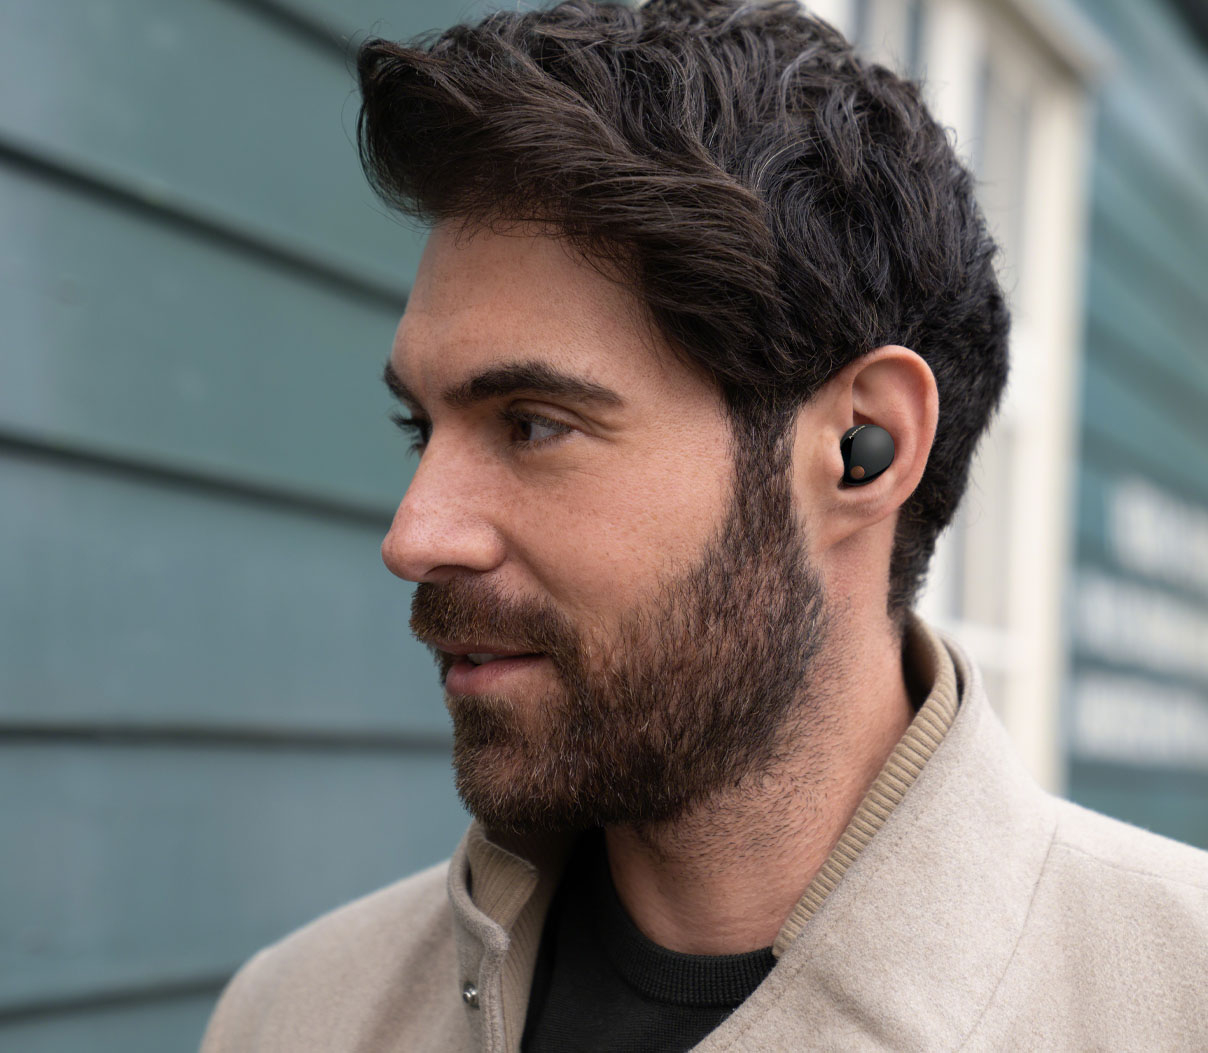 Sony WF-1000XM5 Earbuds Review: They're Smaller and Even Better - CNET